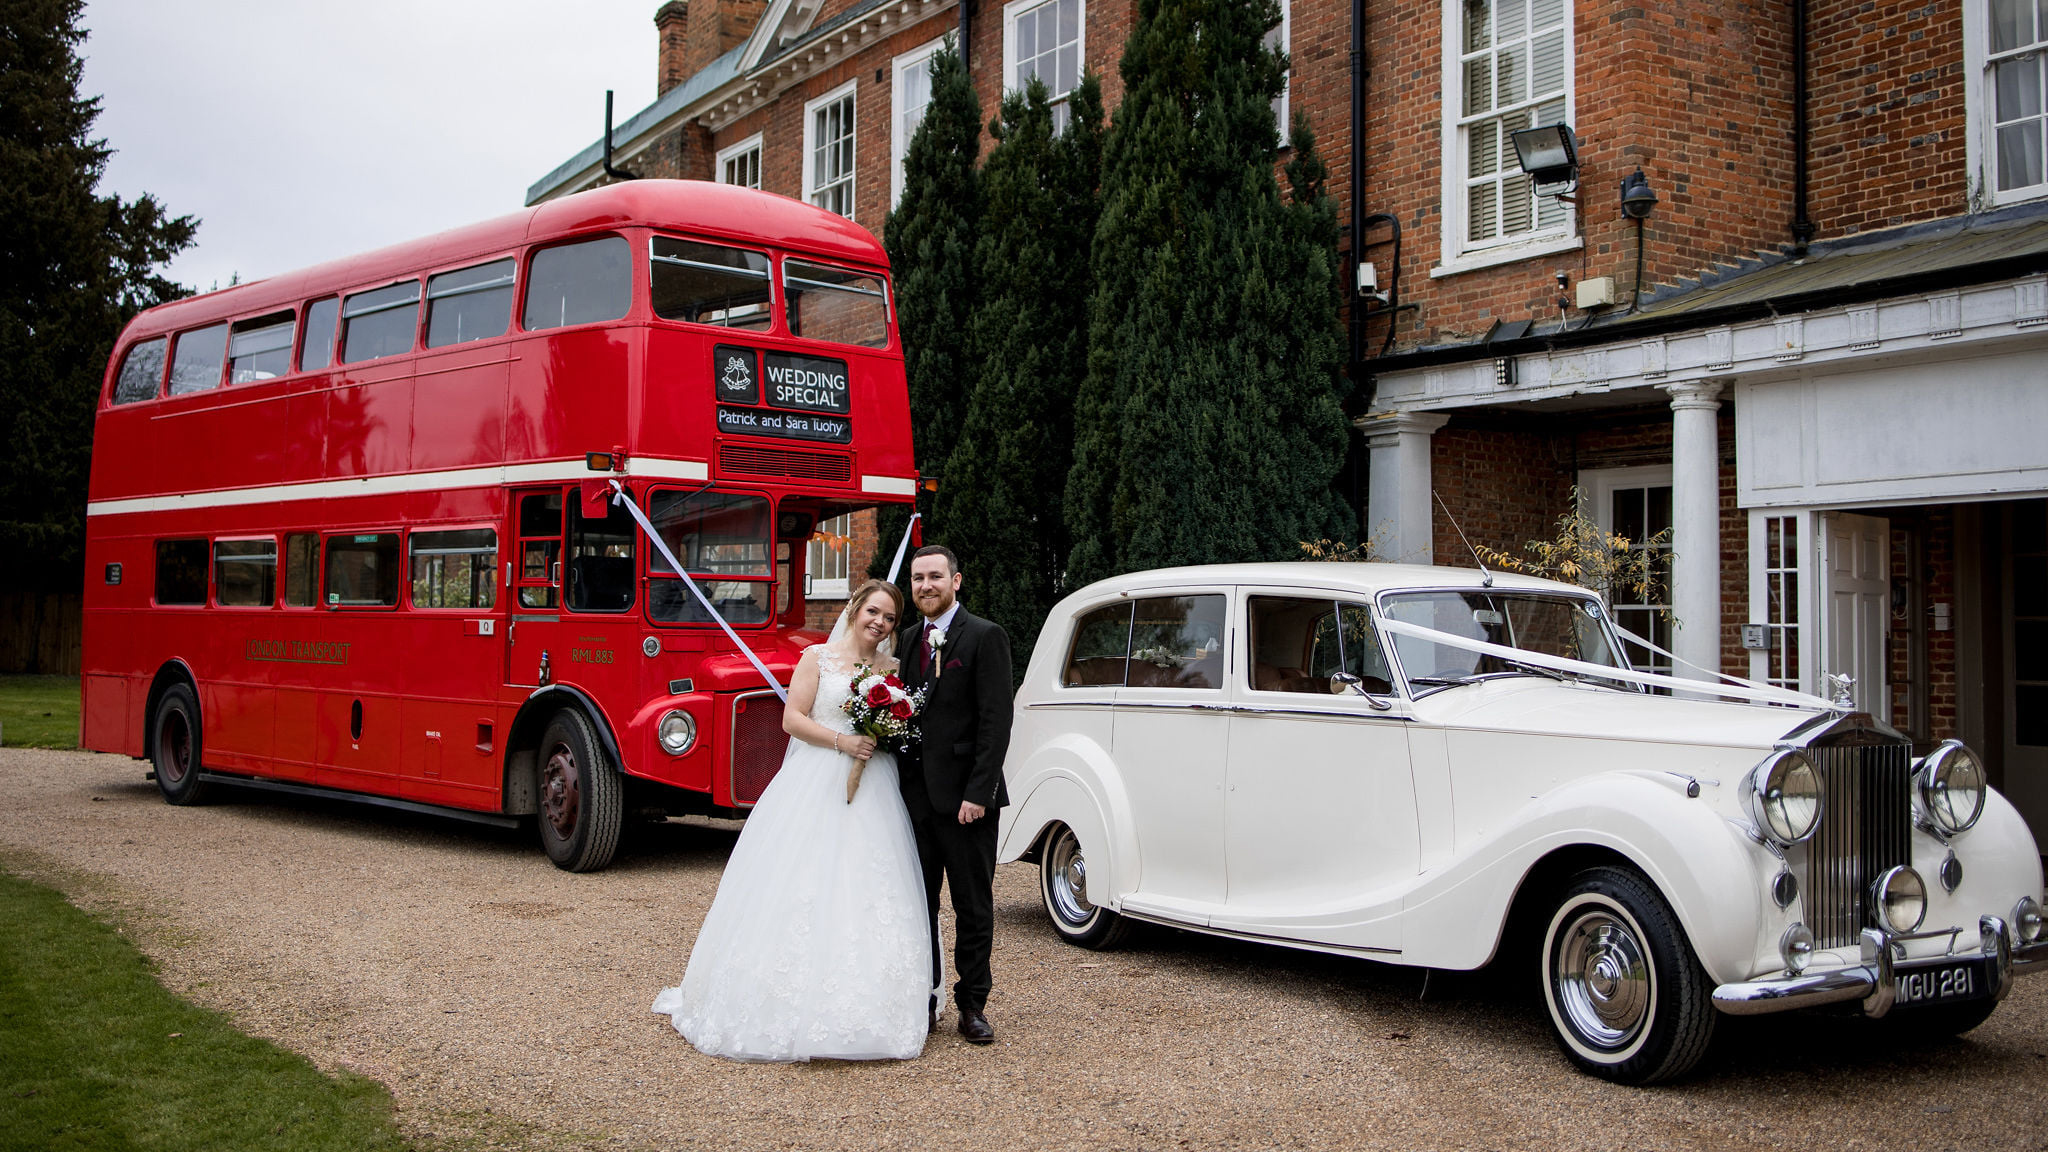 Classic Rolls-Royce followed by a large double decker red bus in front of a wedding venue in Sunbury-on-Thames